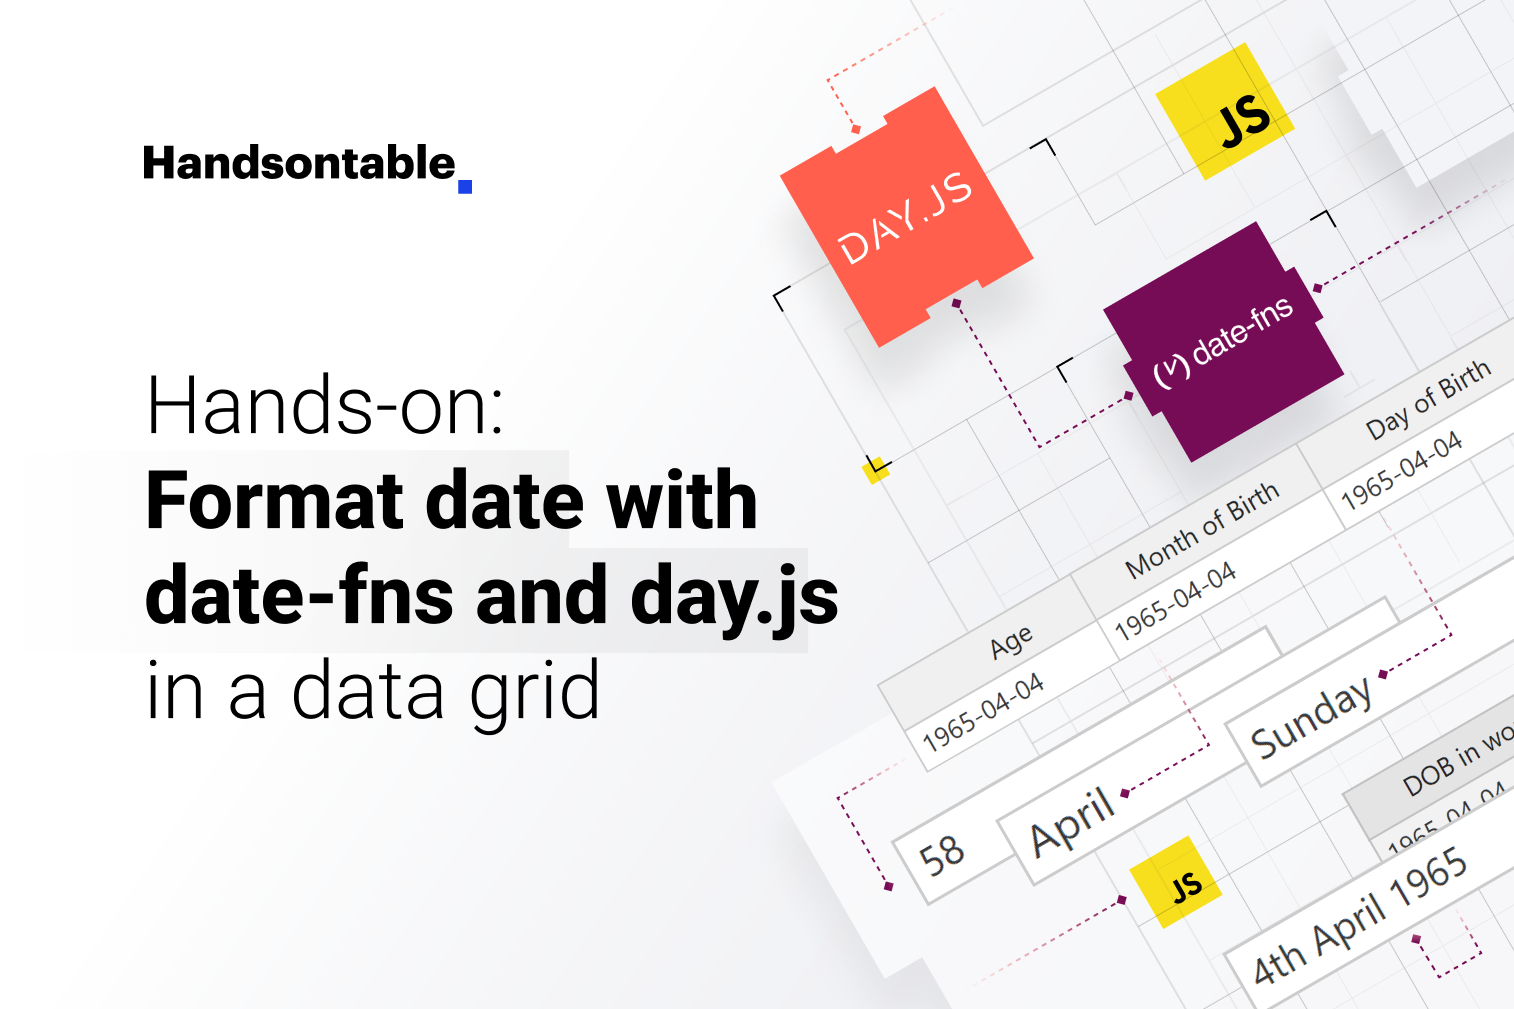 Illustration for the article - Hands-on: Format Date with date-fns and day.js in a data grid